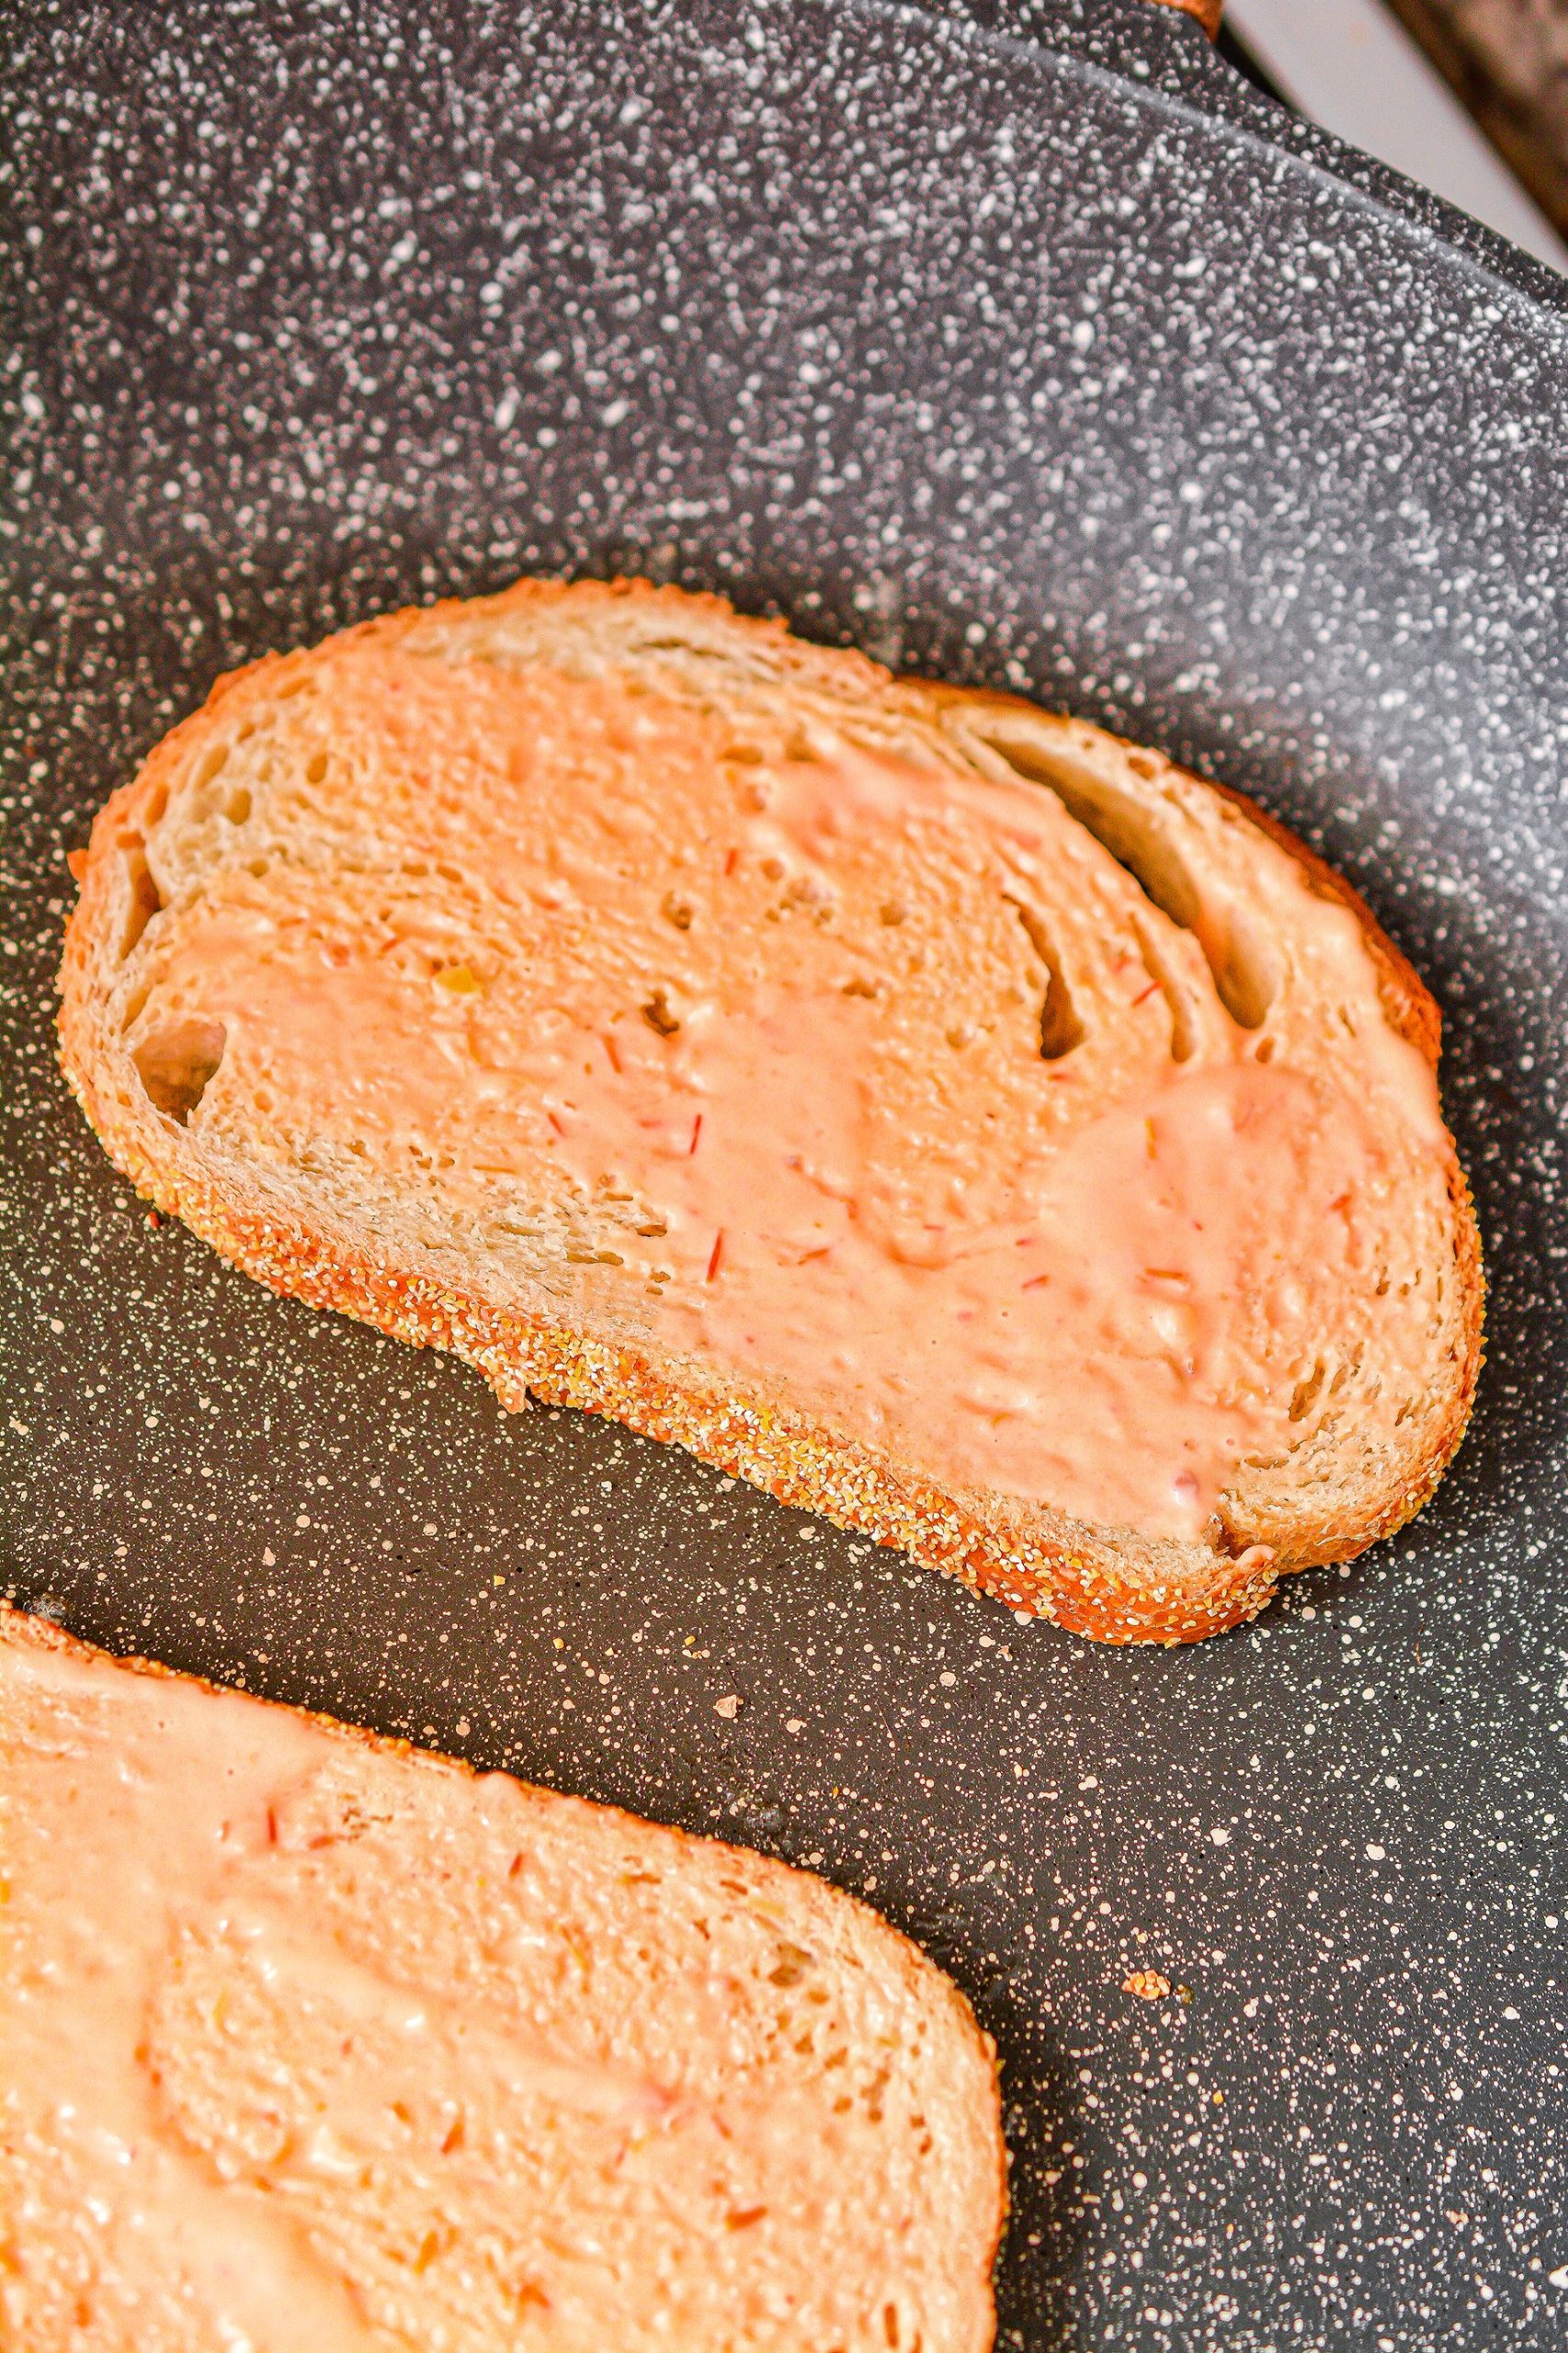 Add a layer of dressing to the other side of the slices of bread in the skillet.